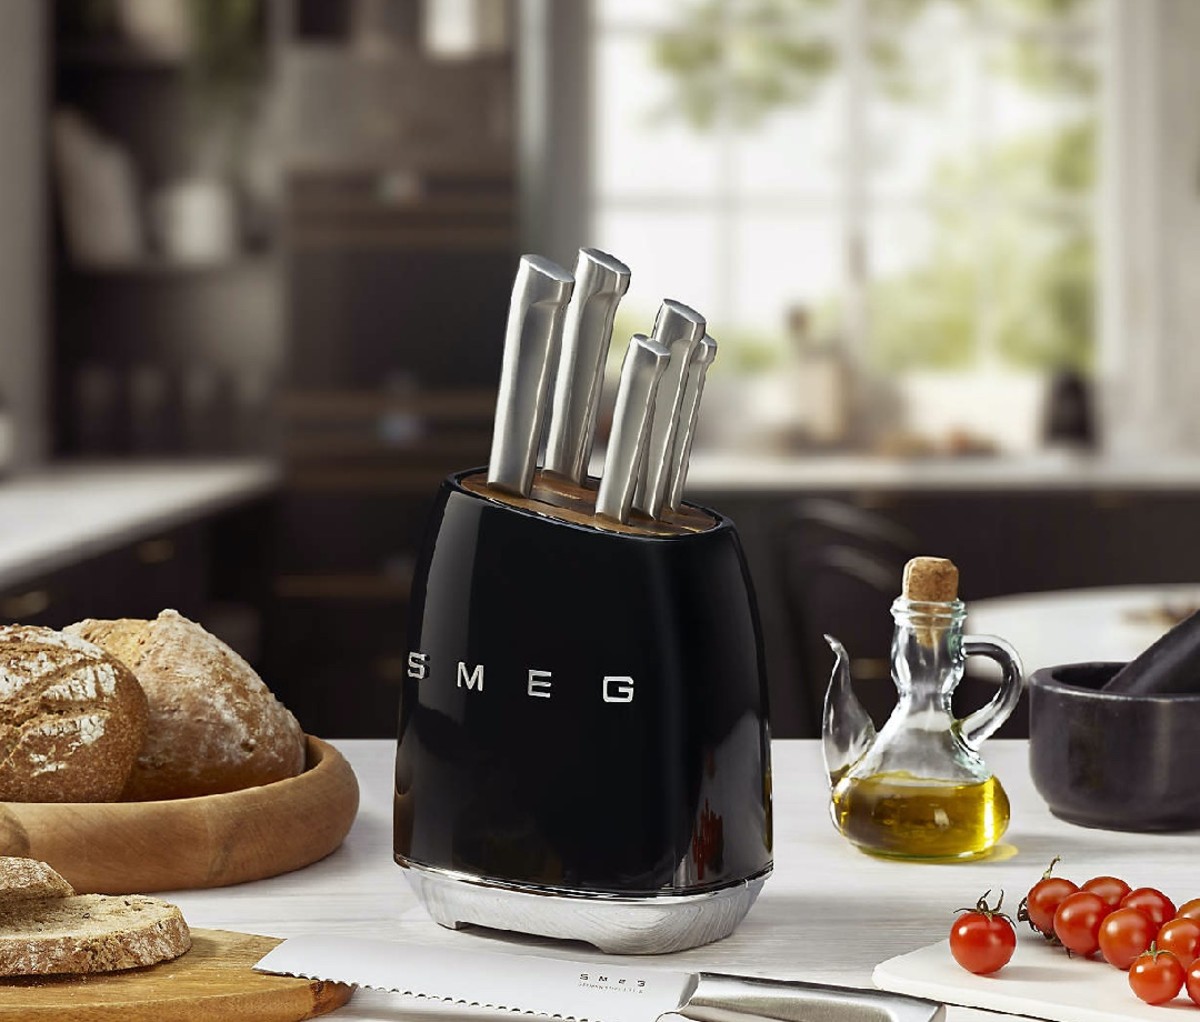 Best Small Kitchen Appliances: Our Place Always Pan, Caraway, and More -  Men's Journal